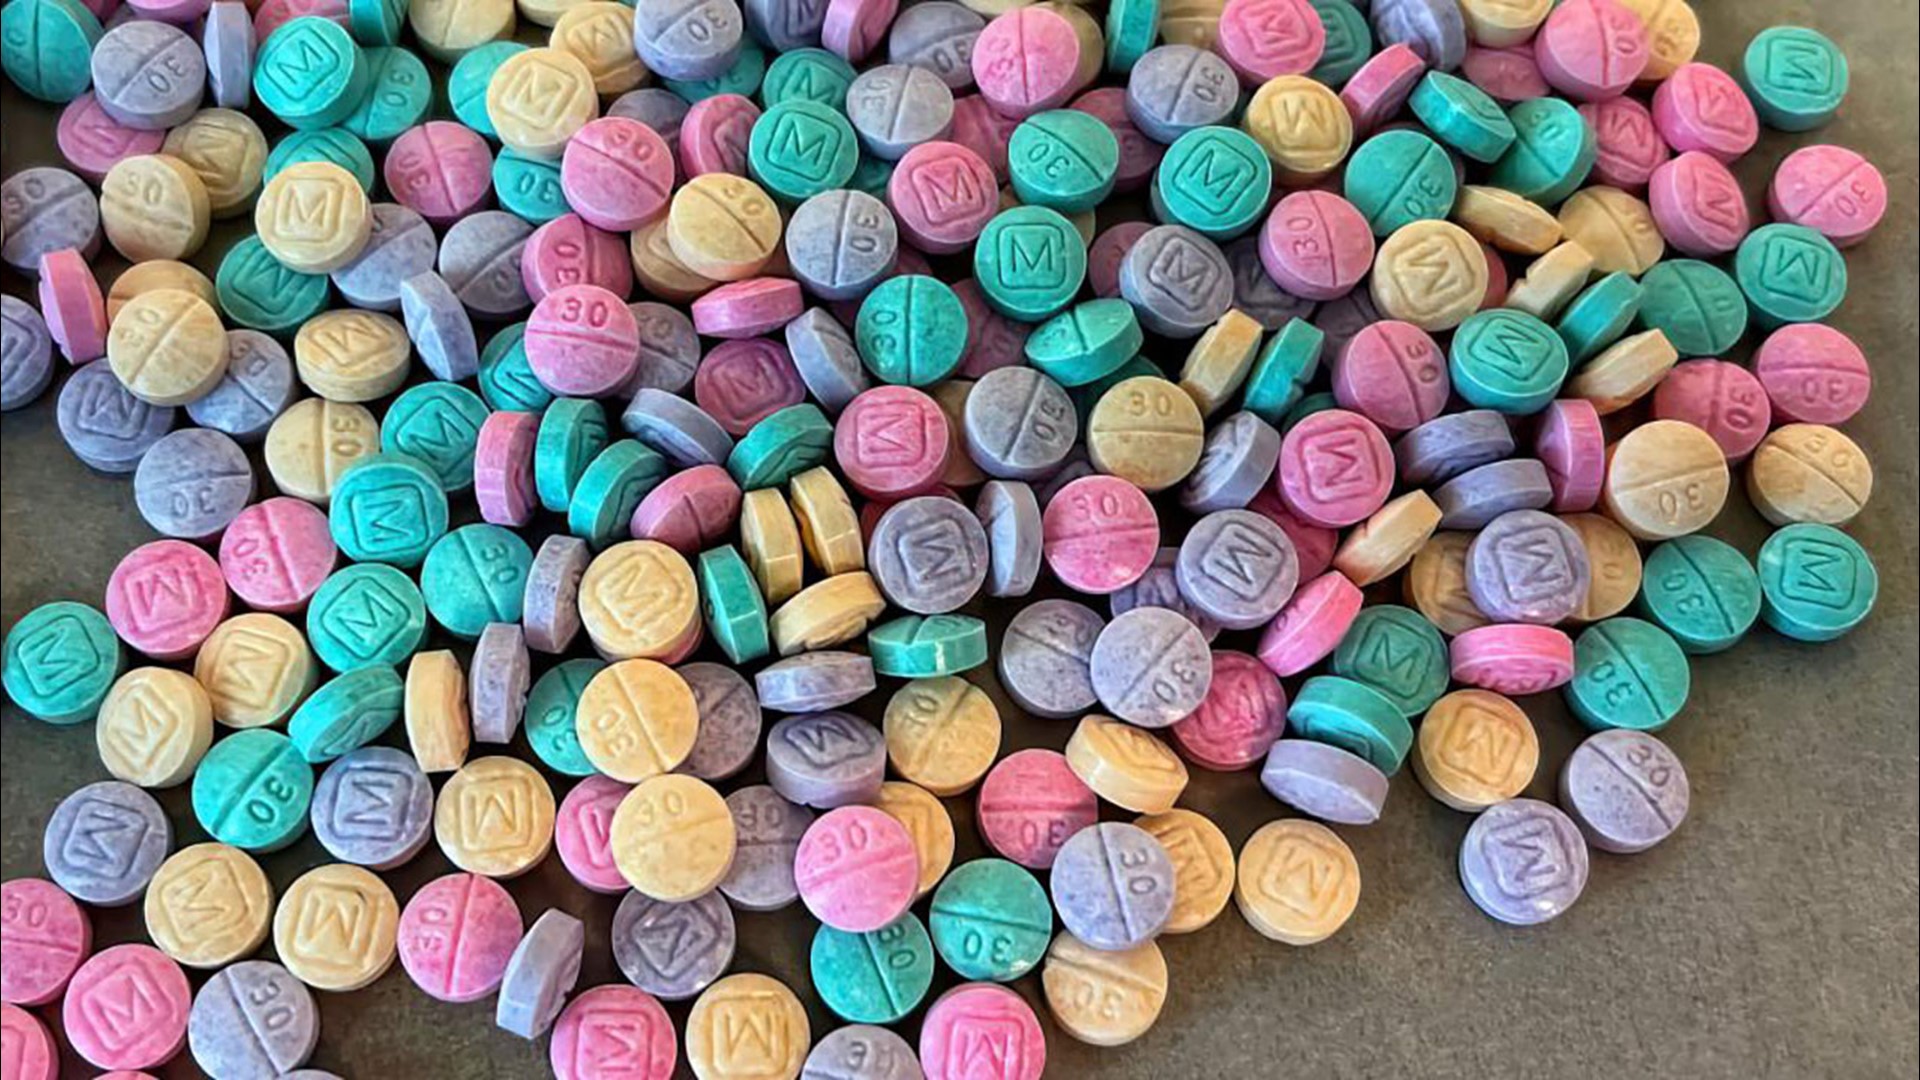 DEA officials are warning the public about "brightly colored fentanyl" pills that are being used to target young Americans.